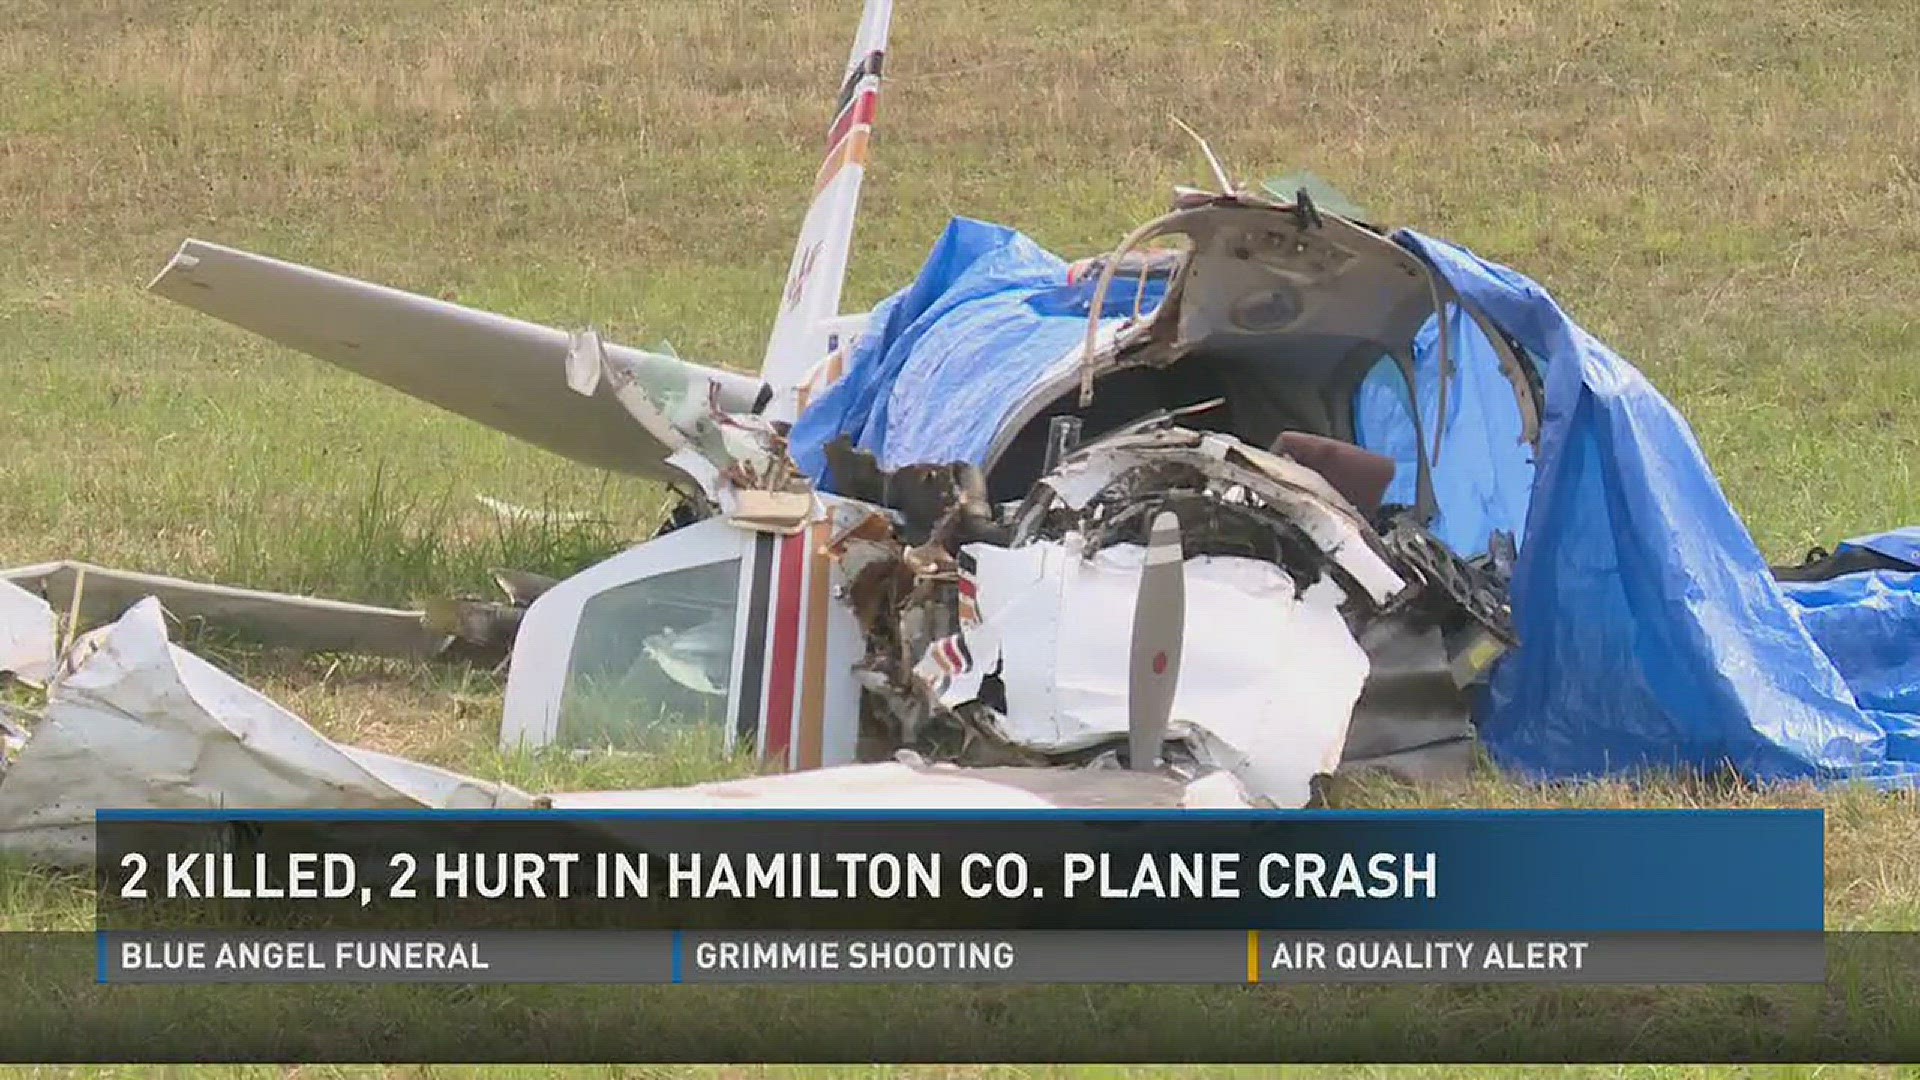 Two people were killed in a plane crash in Hamilton County.